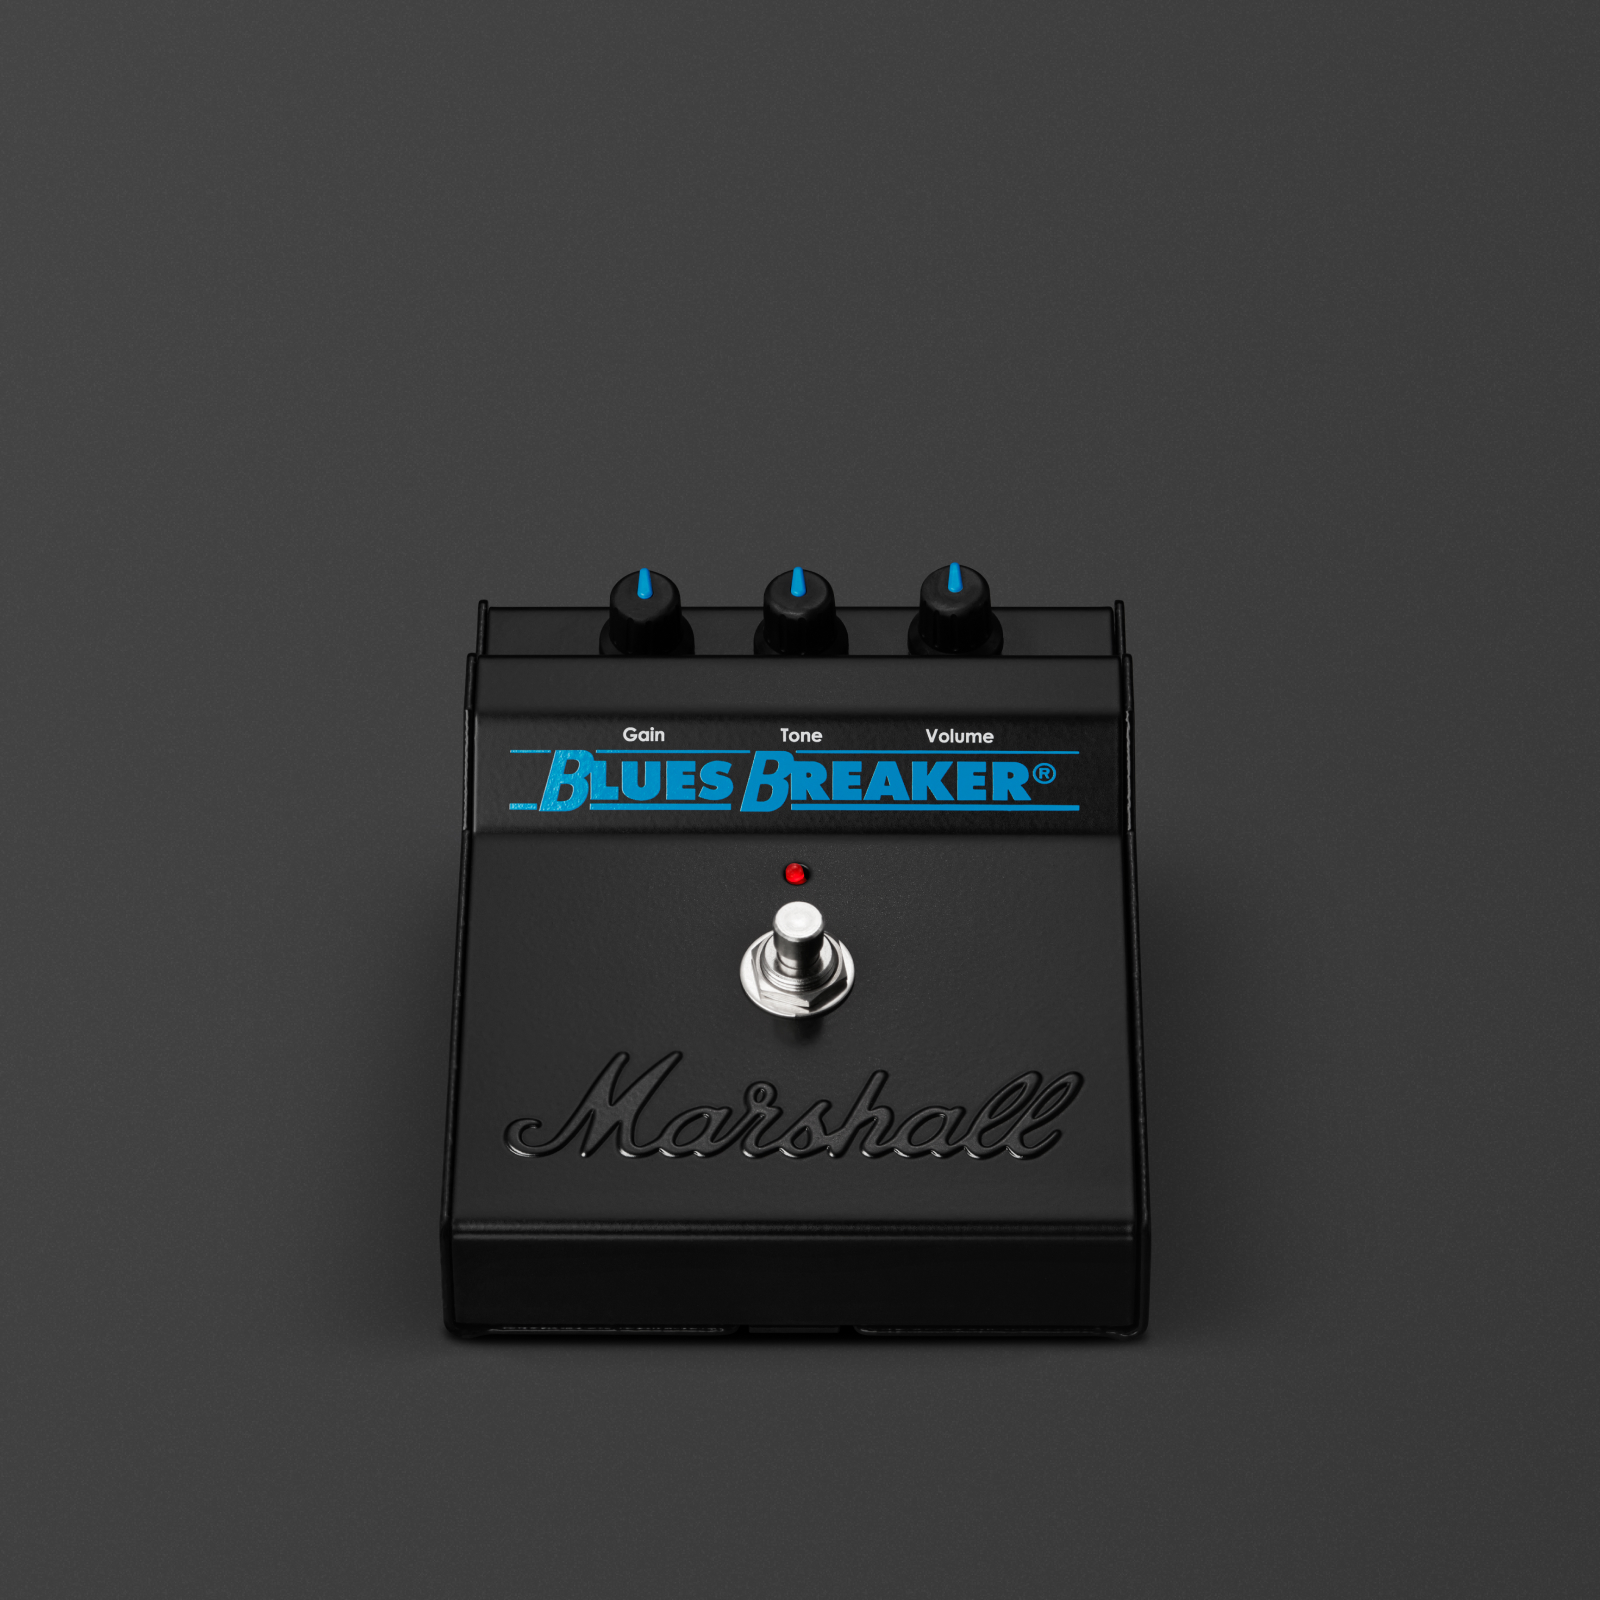 Black Shredmaster effects pedal for recreating the iconic sound of the original.